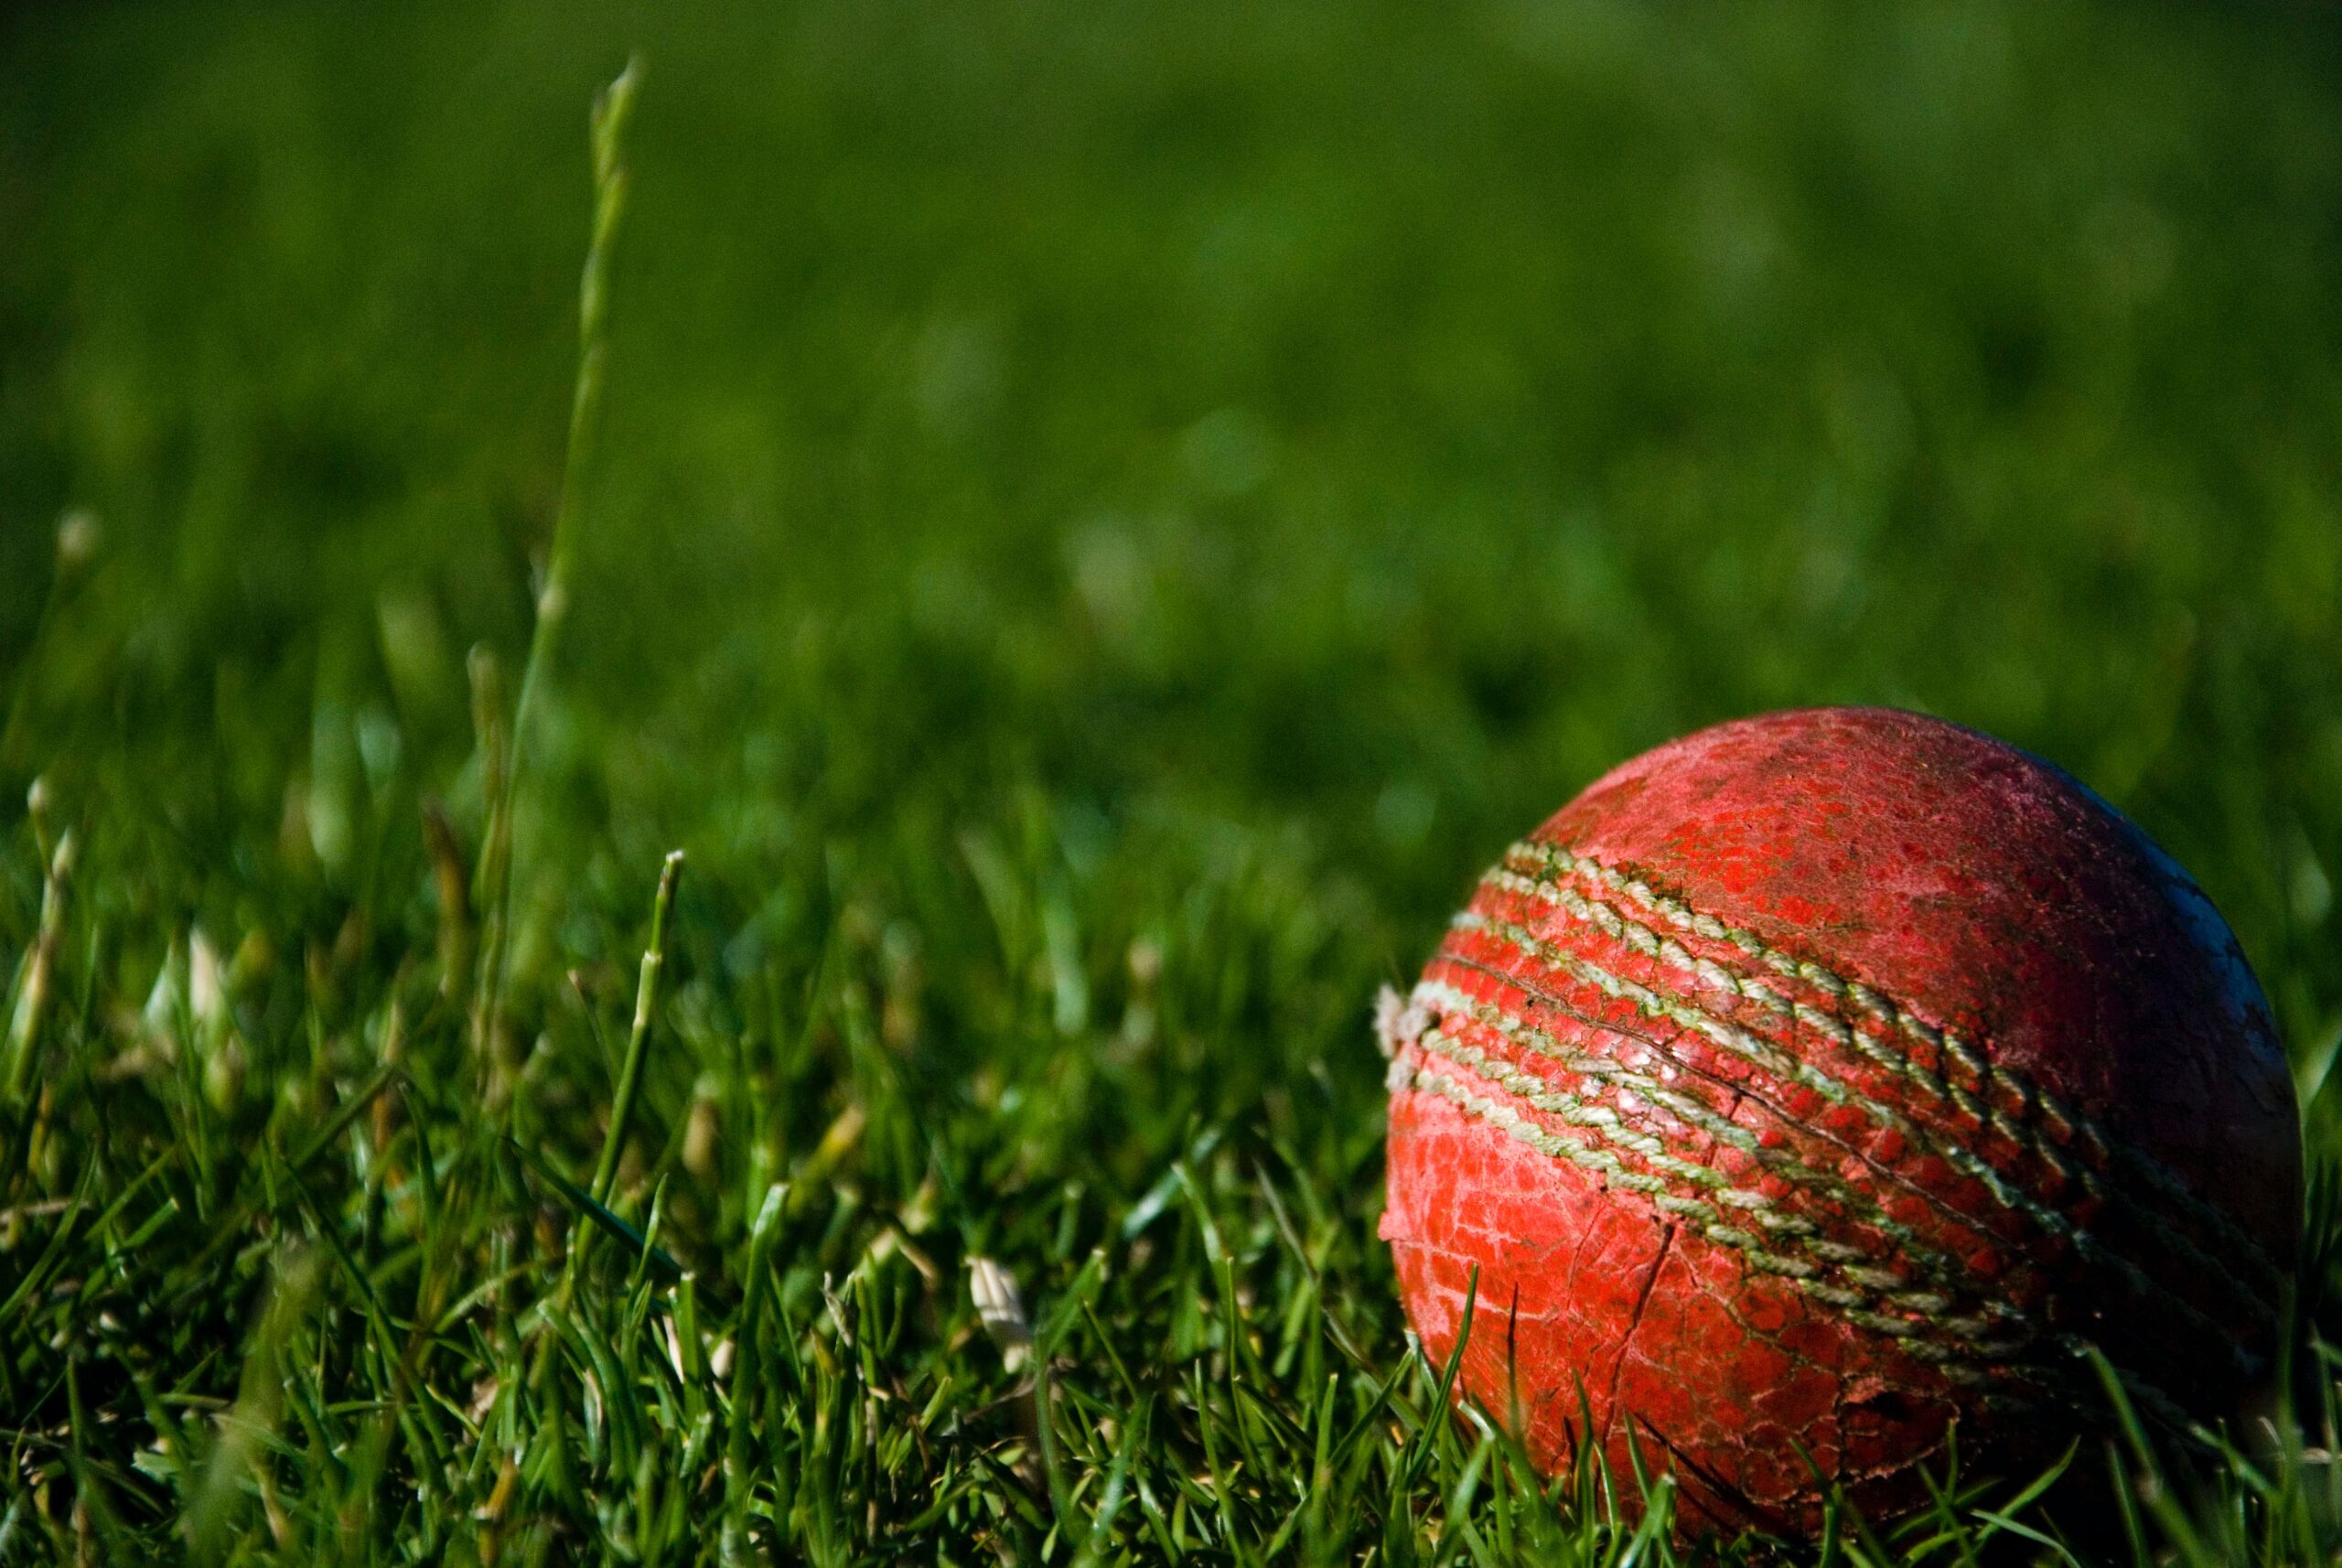 Cricket Ball in the Grass